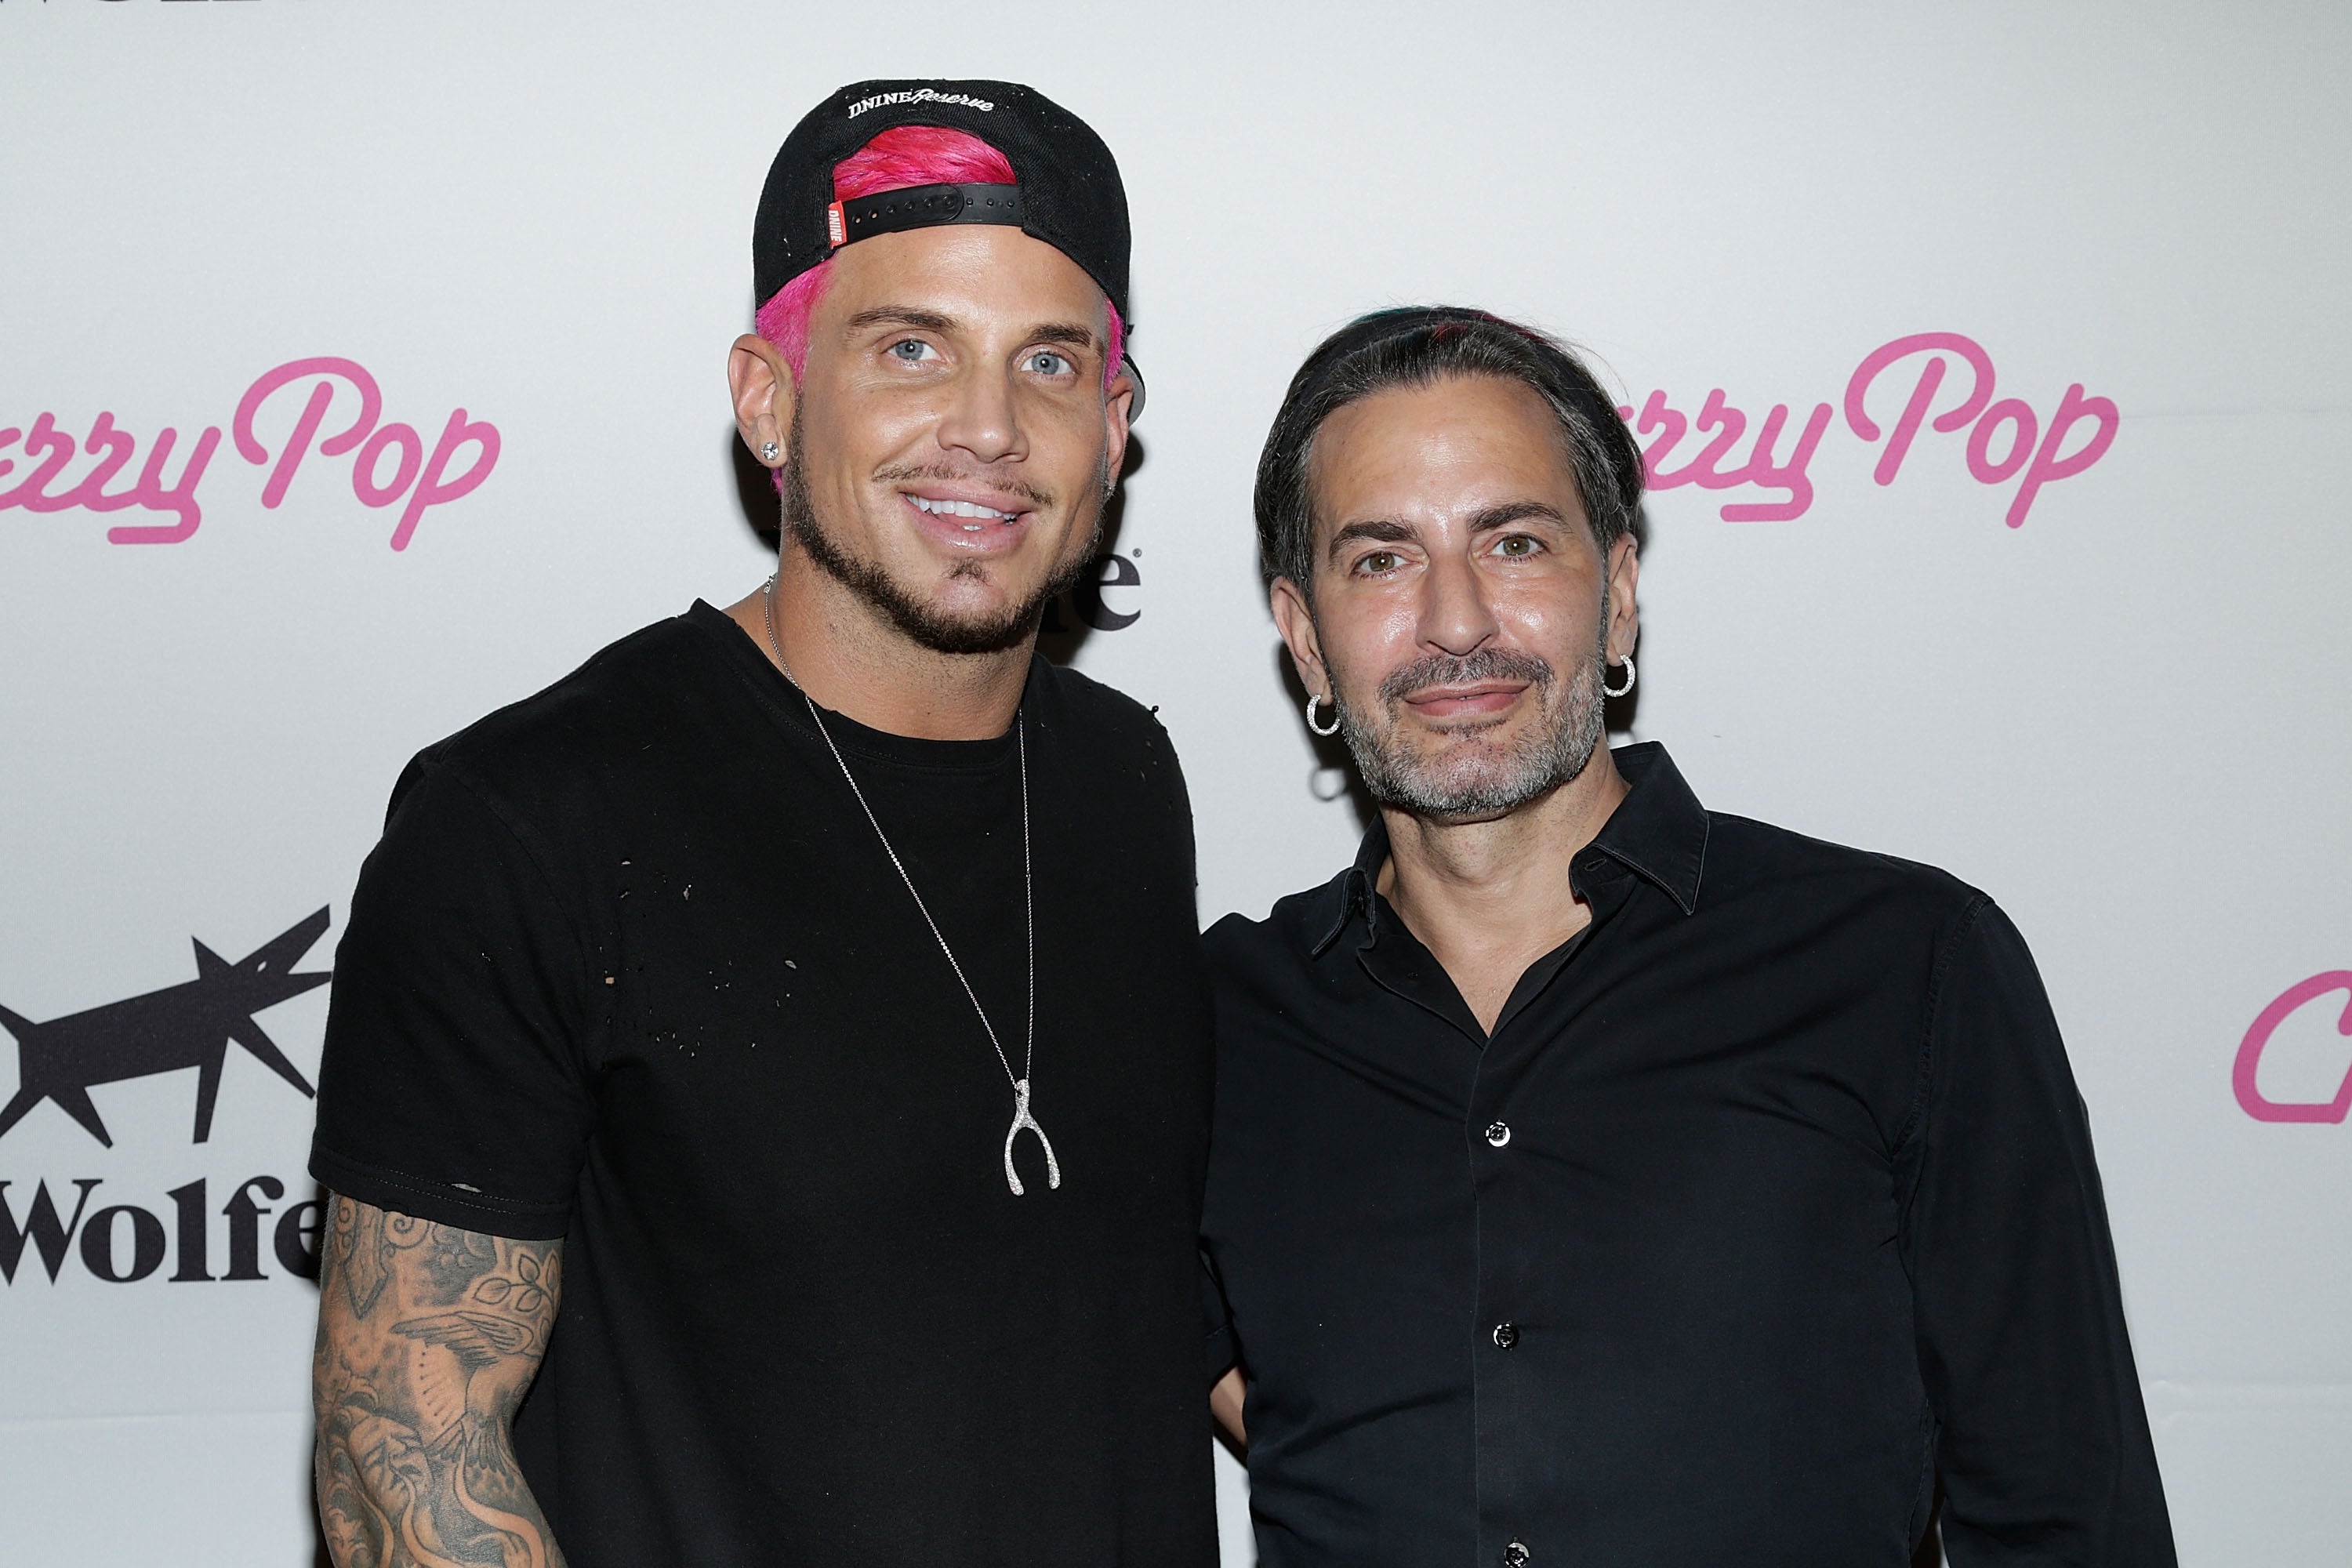 Marc Jacobs Gets Married to Char Defrancesco in Intimate New York Wedding